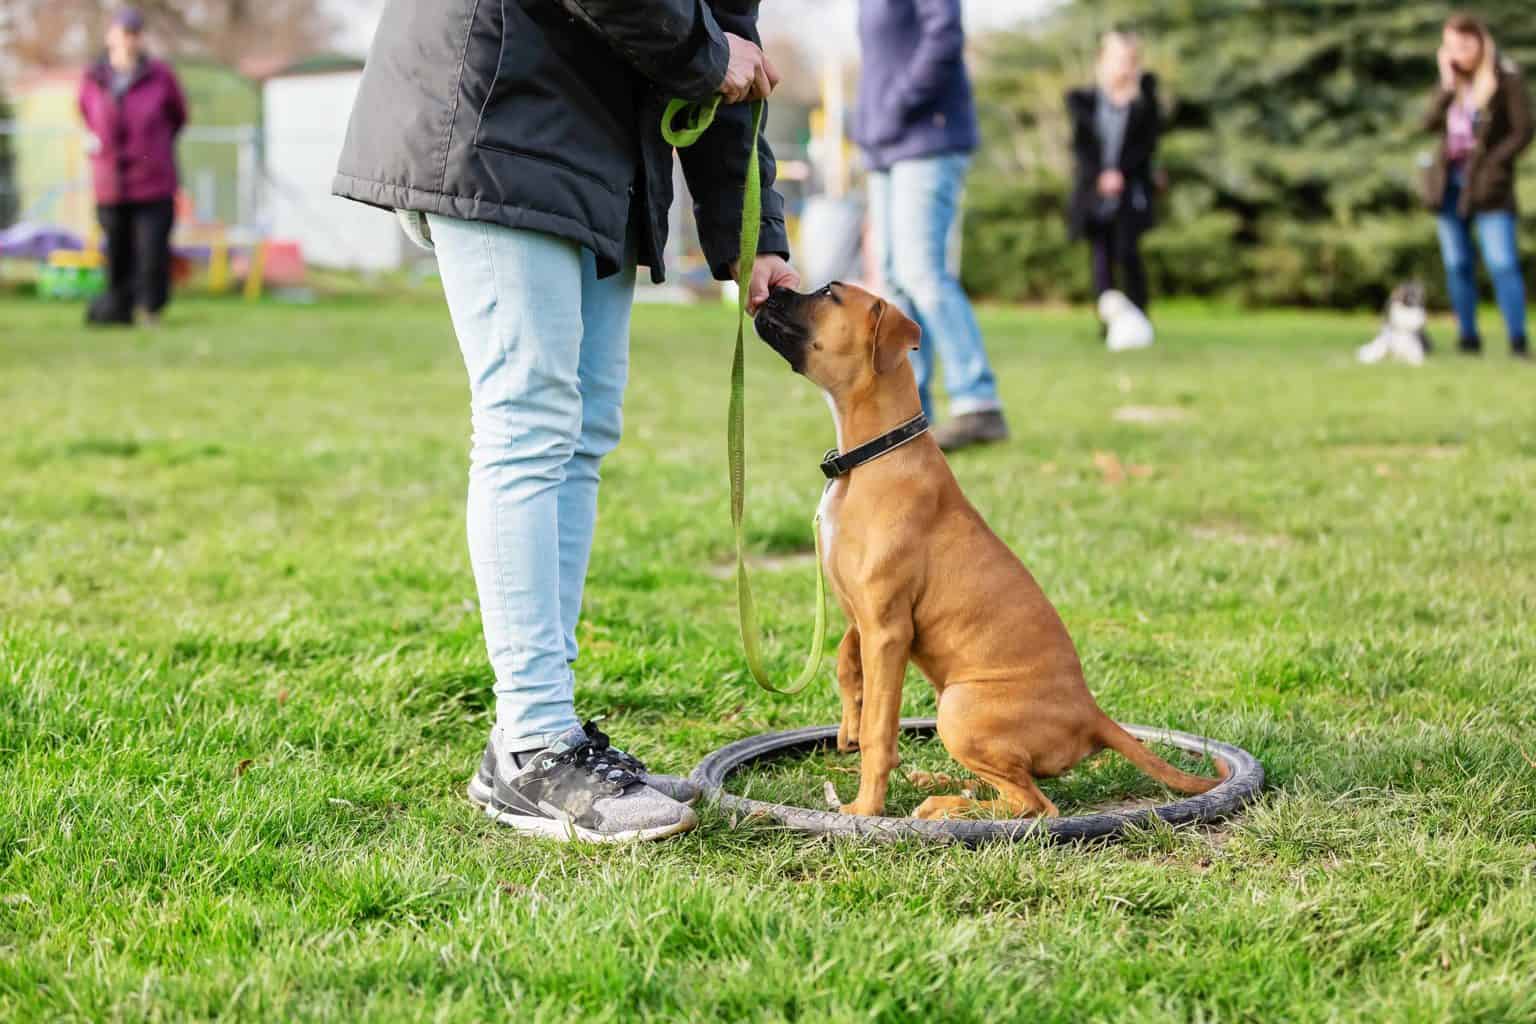 Woman trains boxer at dog training class. To start a dog training business you need two basic things — the skill of teaching hounds and a love for animals. Business skills are a plus.